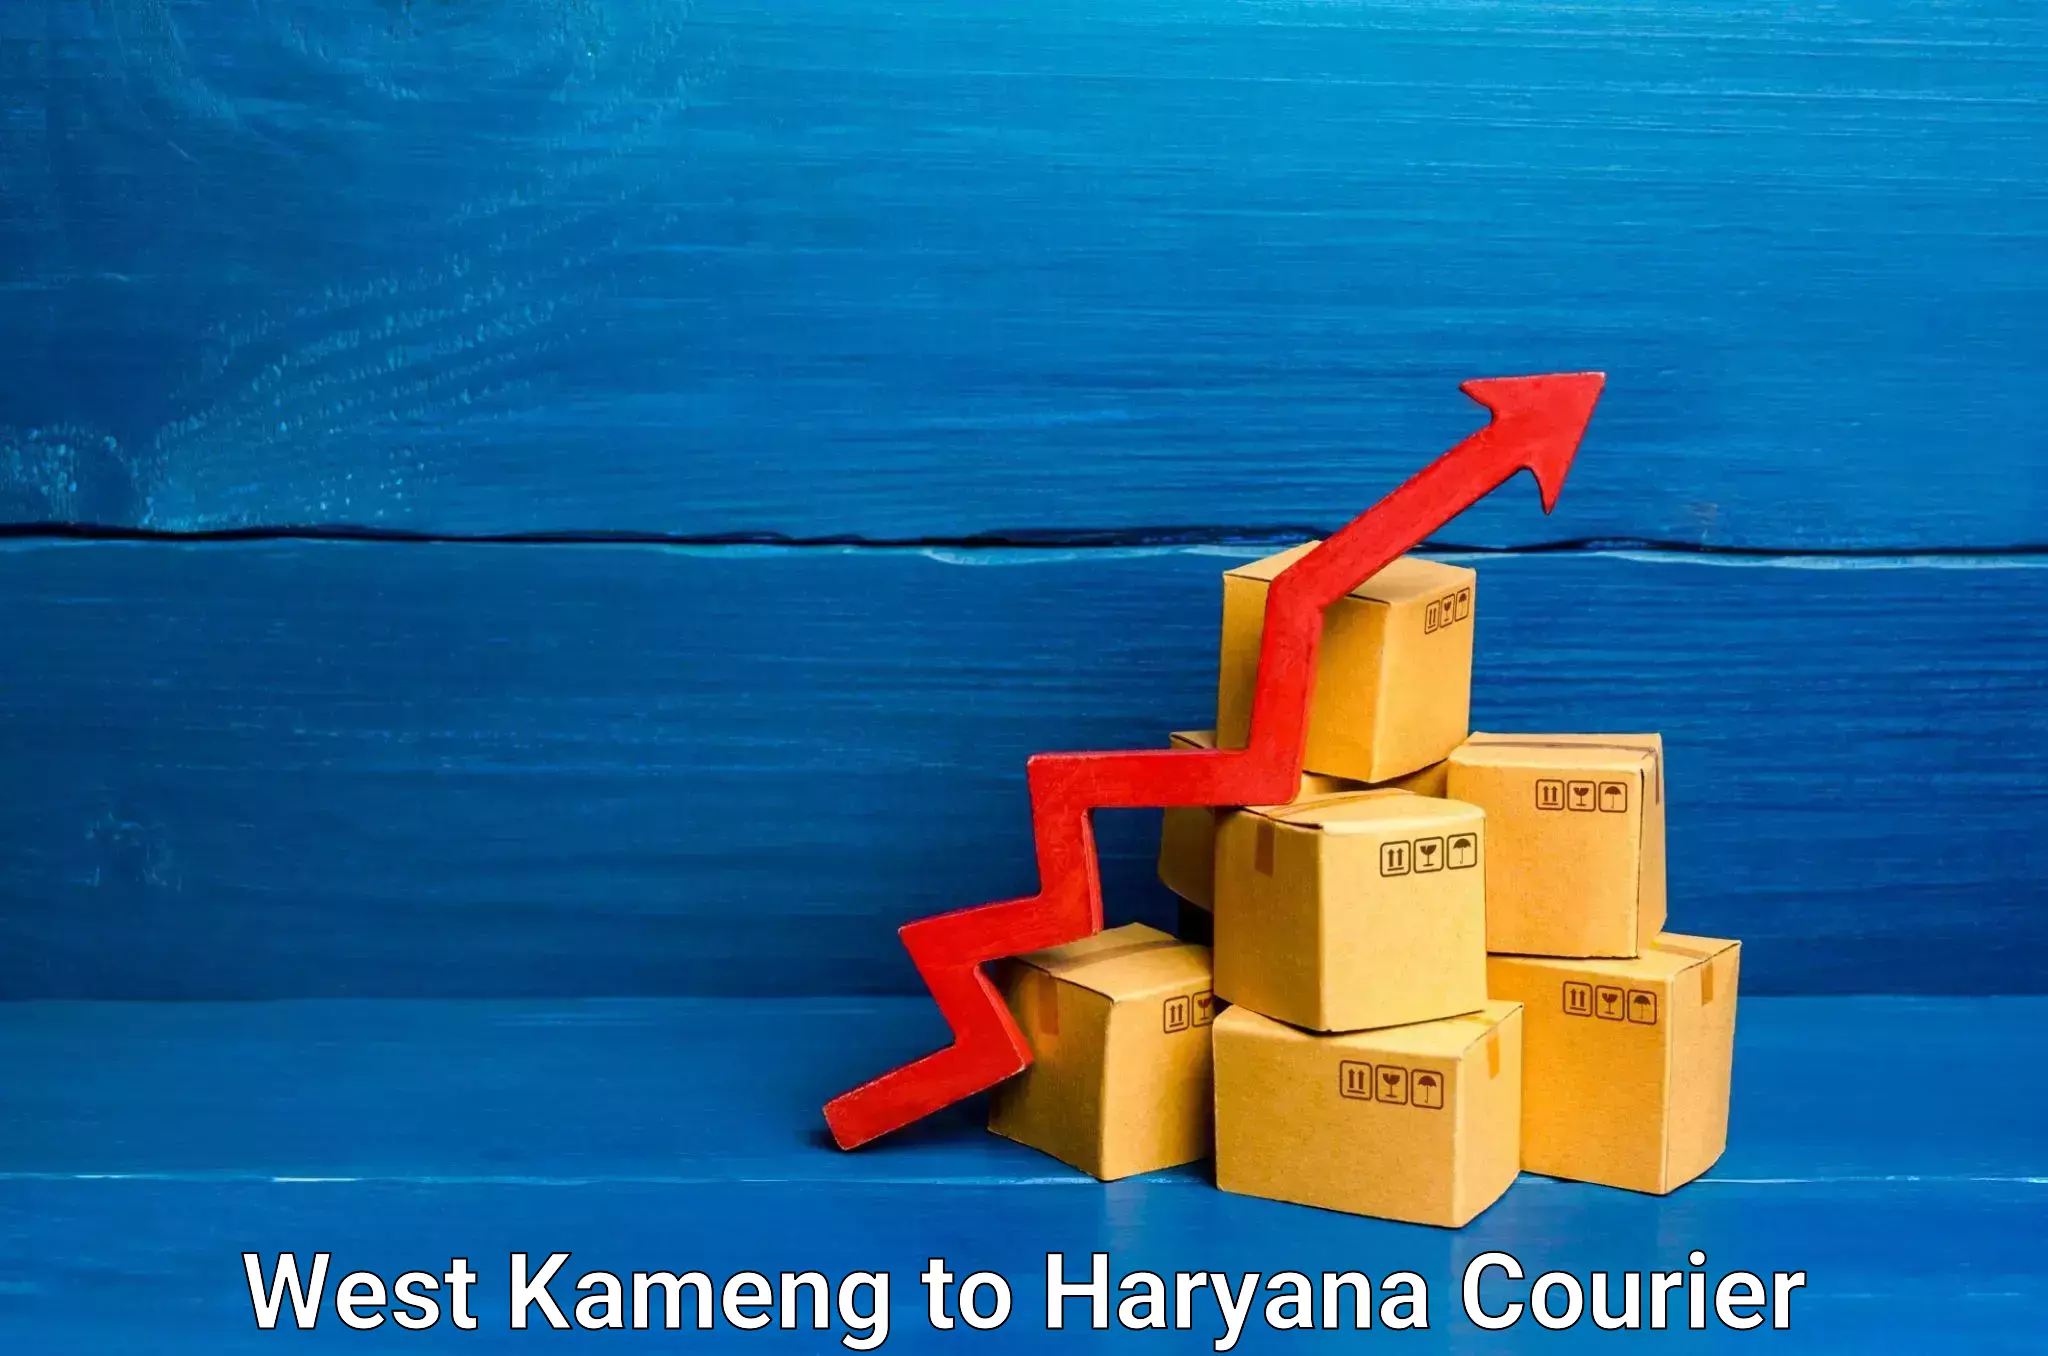 Courier service innovation West Kameng to Haryana